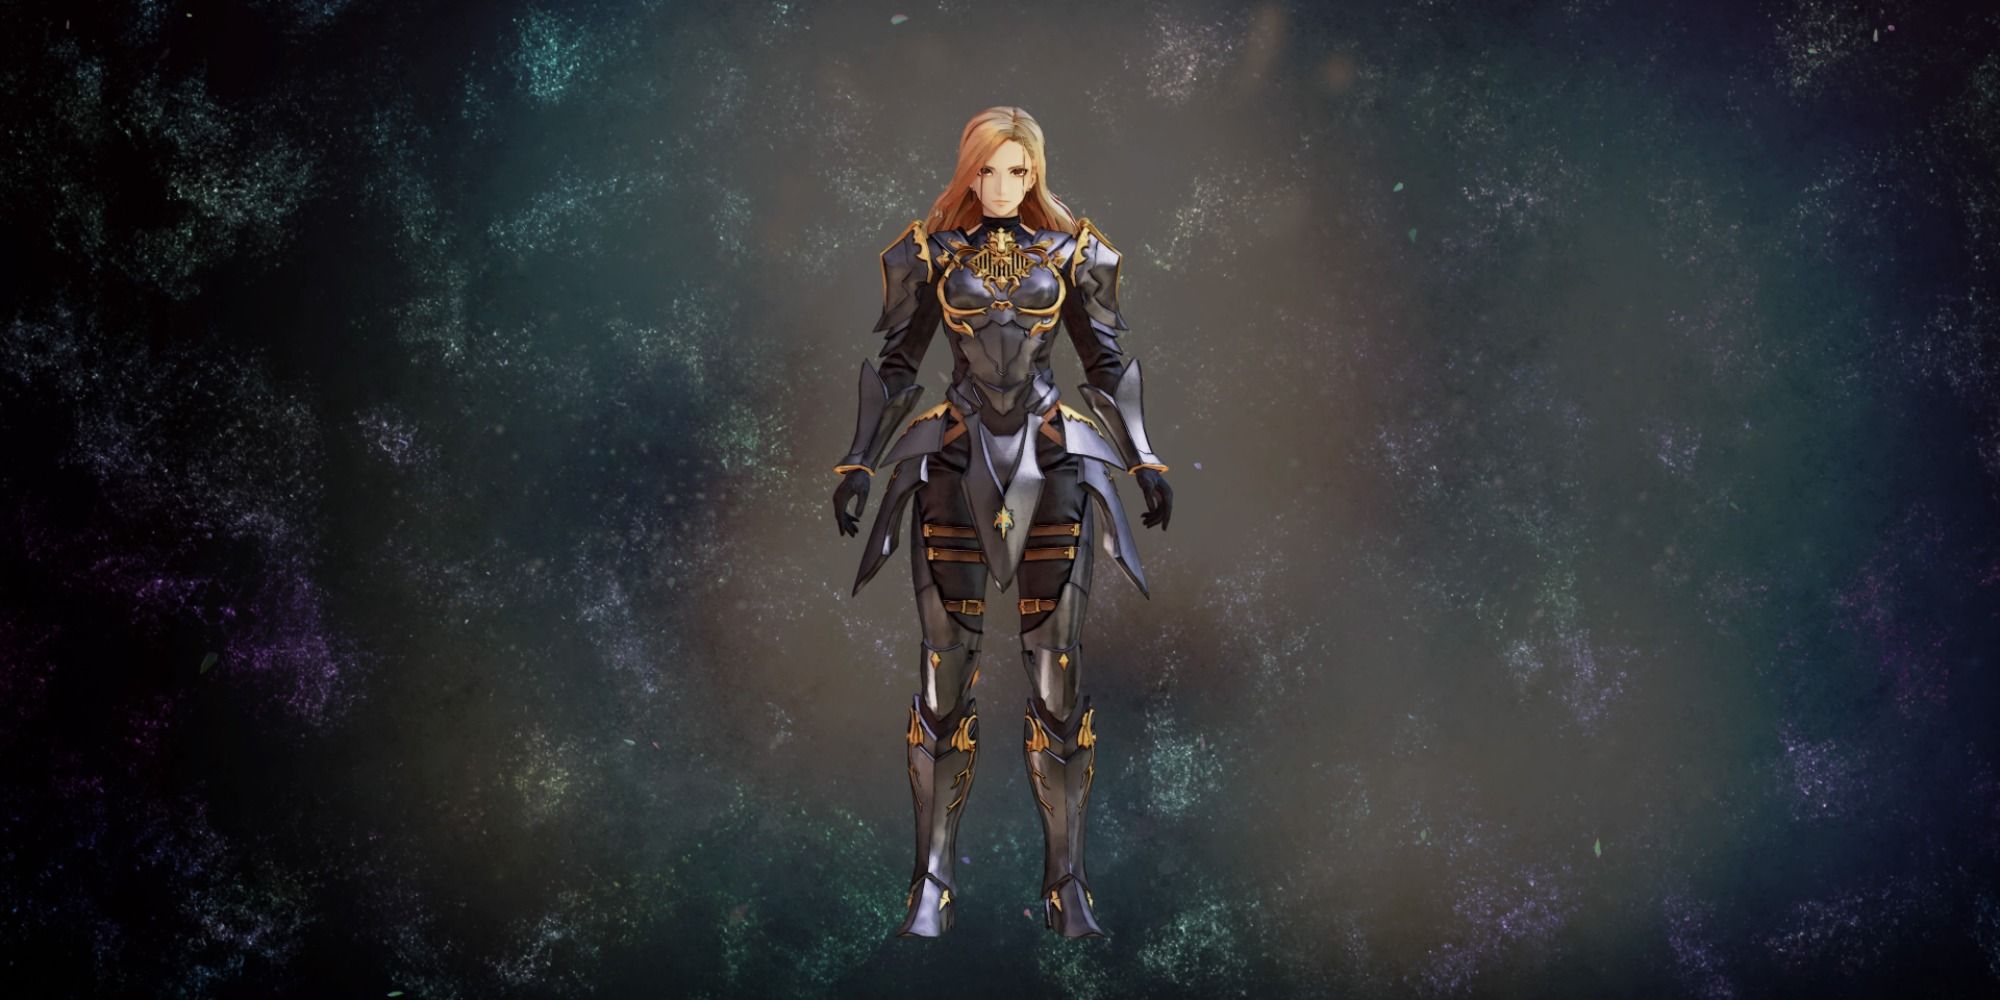 Night Guardsman Armor Outfit for Kisara in Tales of Arise